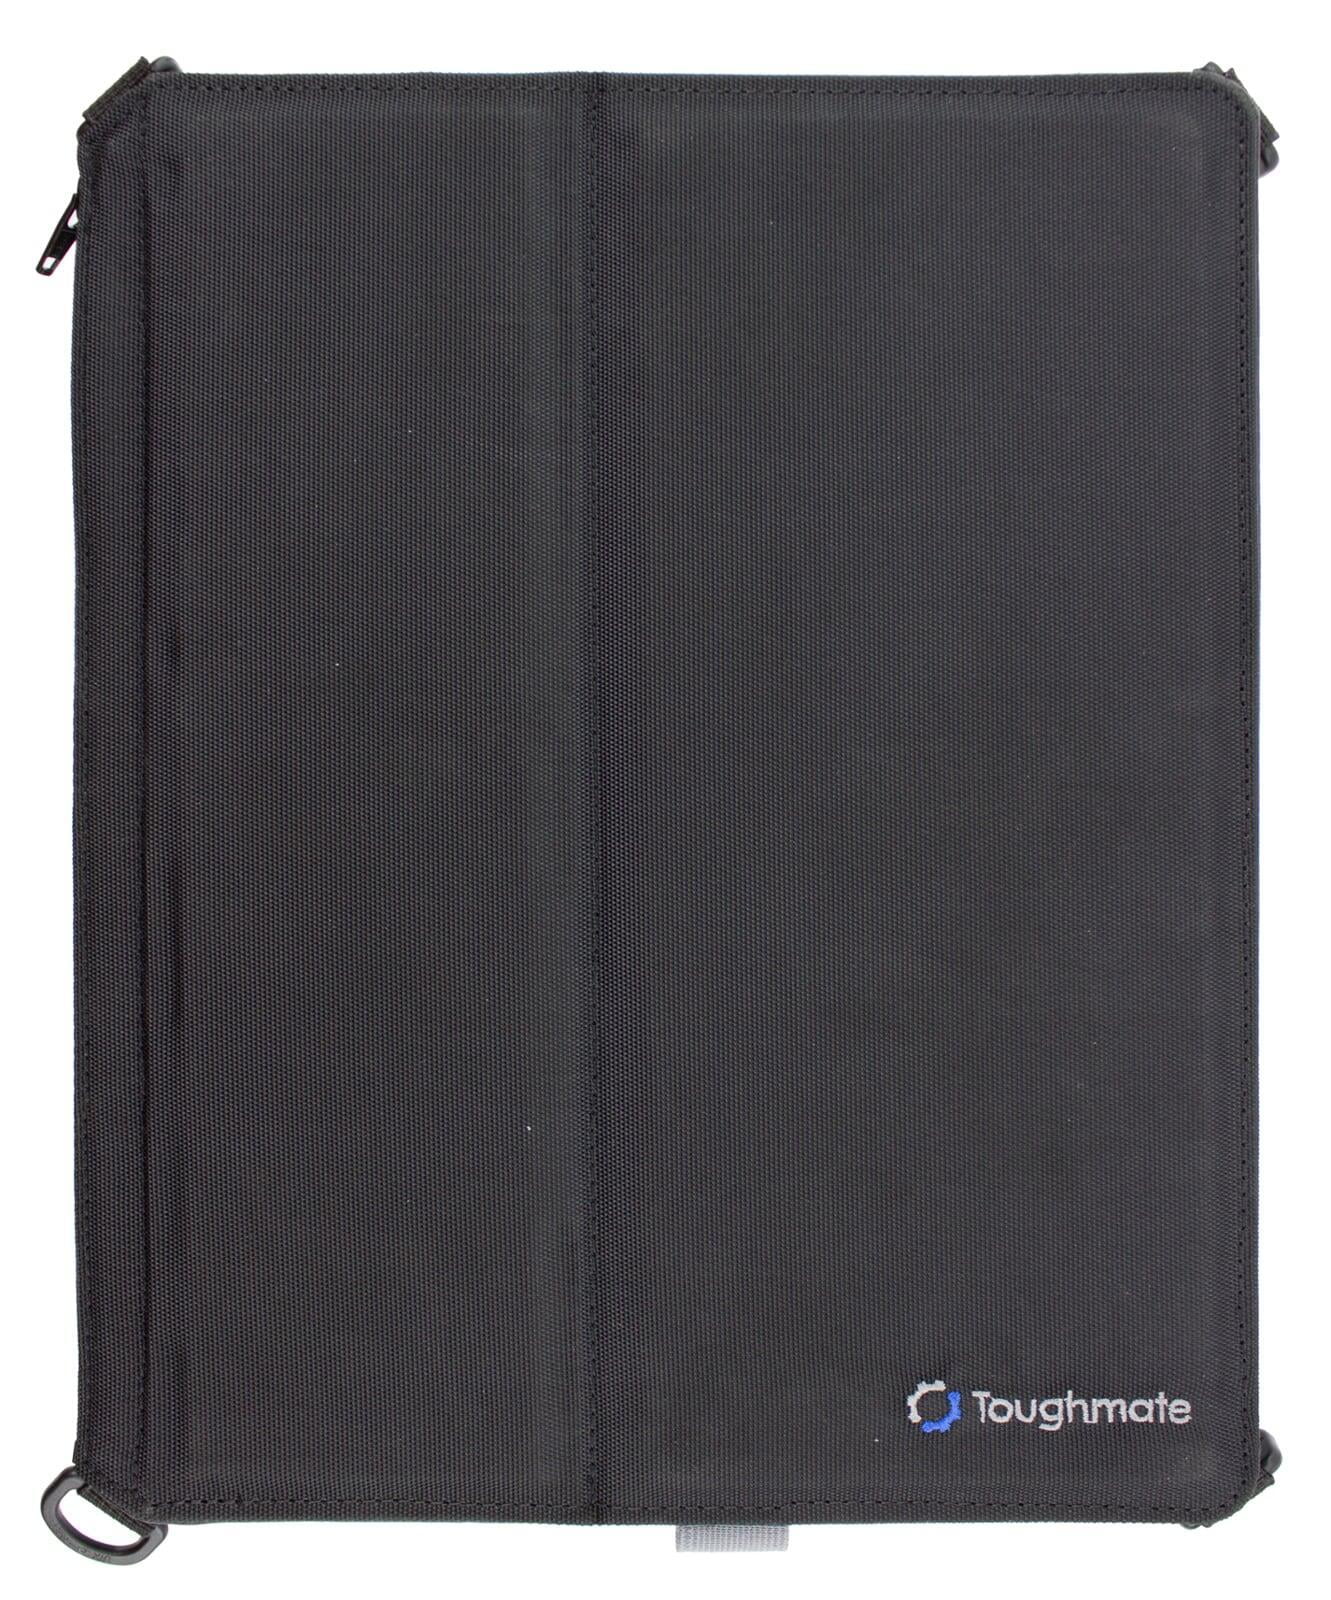 Toughmate 33 Tablet Always-On – Closeout